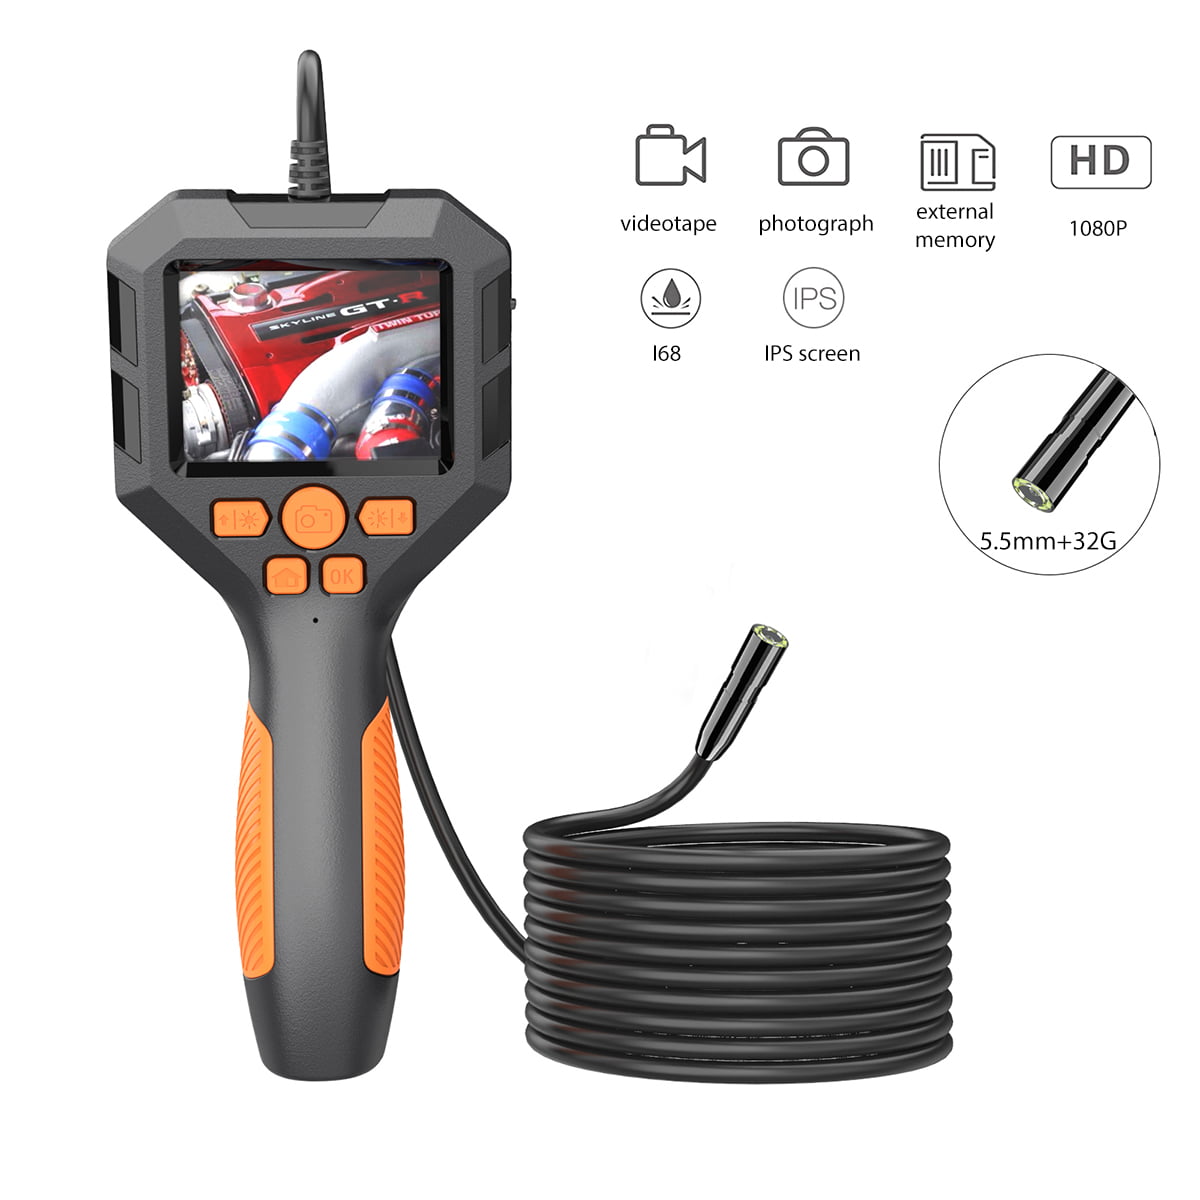 Endoscopy Camera with 8 LED Lights Handheld IP67 Waterproof USB Camera Industrial Endoscope 16.4ft Flexible Probe Portable Endoscopic Camera 170° Horizontal View for Sewer Pipe Wall - Walmart.com